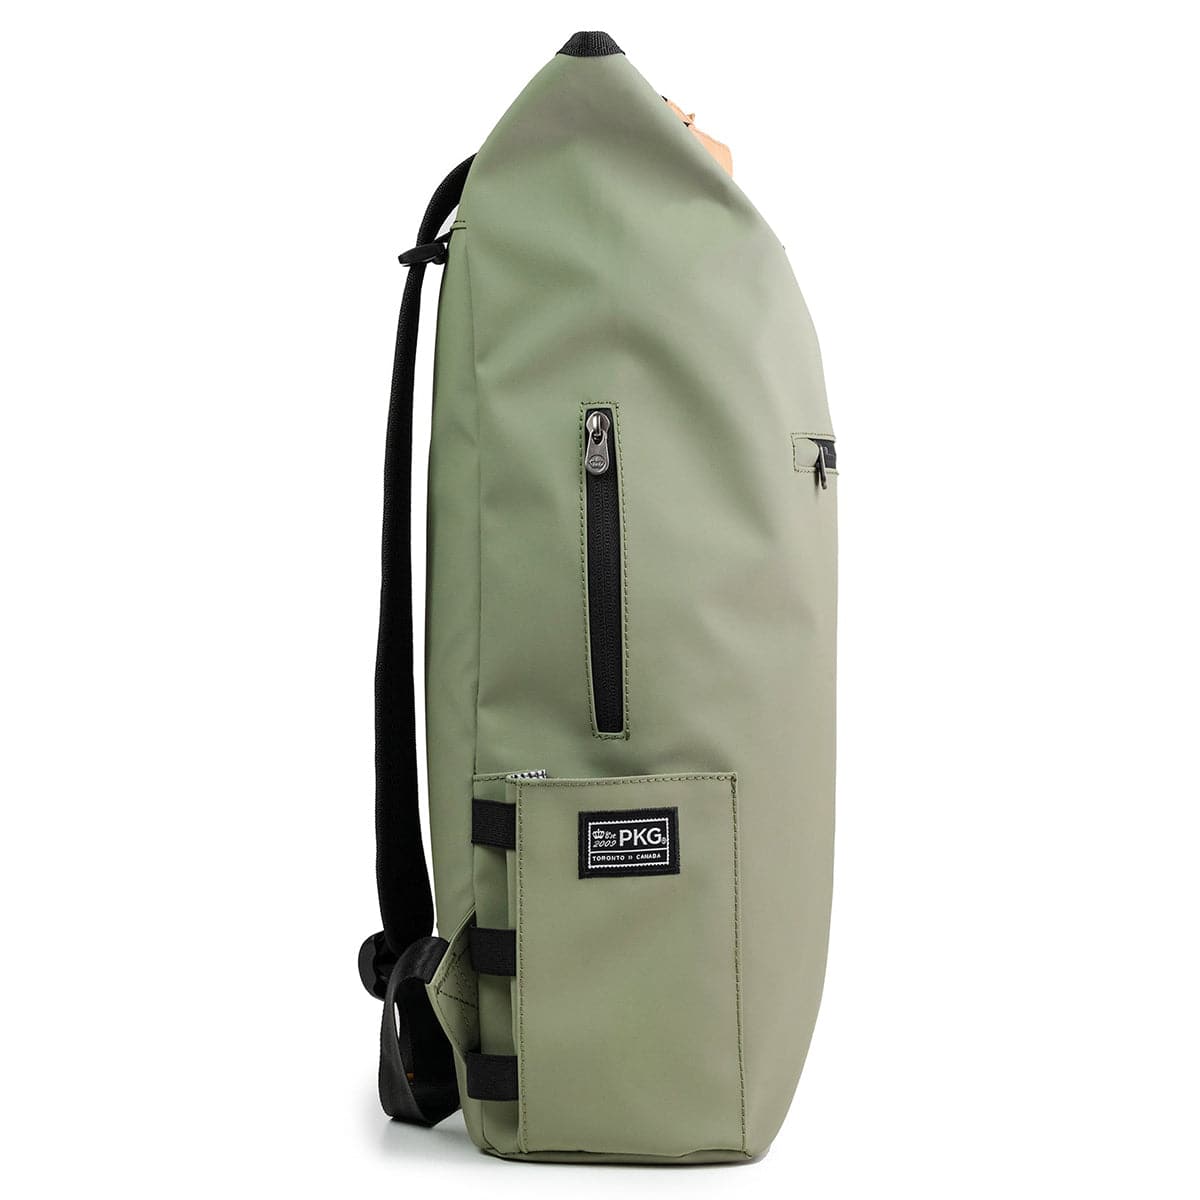 PKG Liberty Recycled Backpack